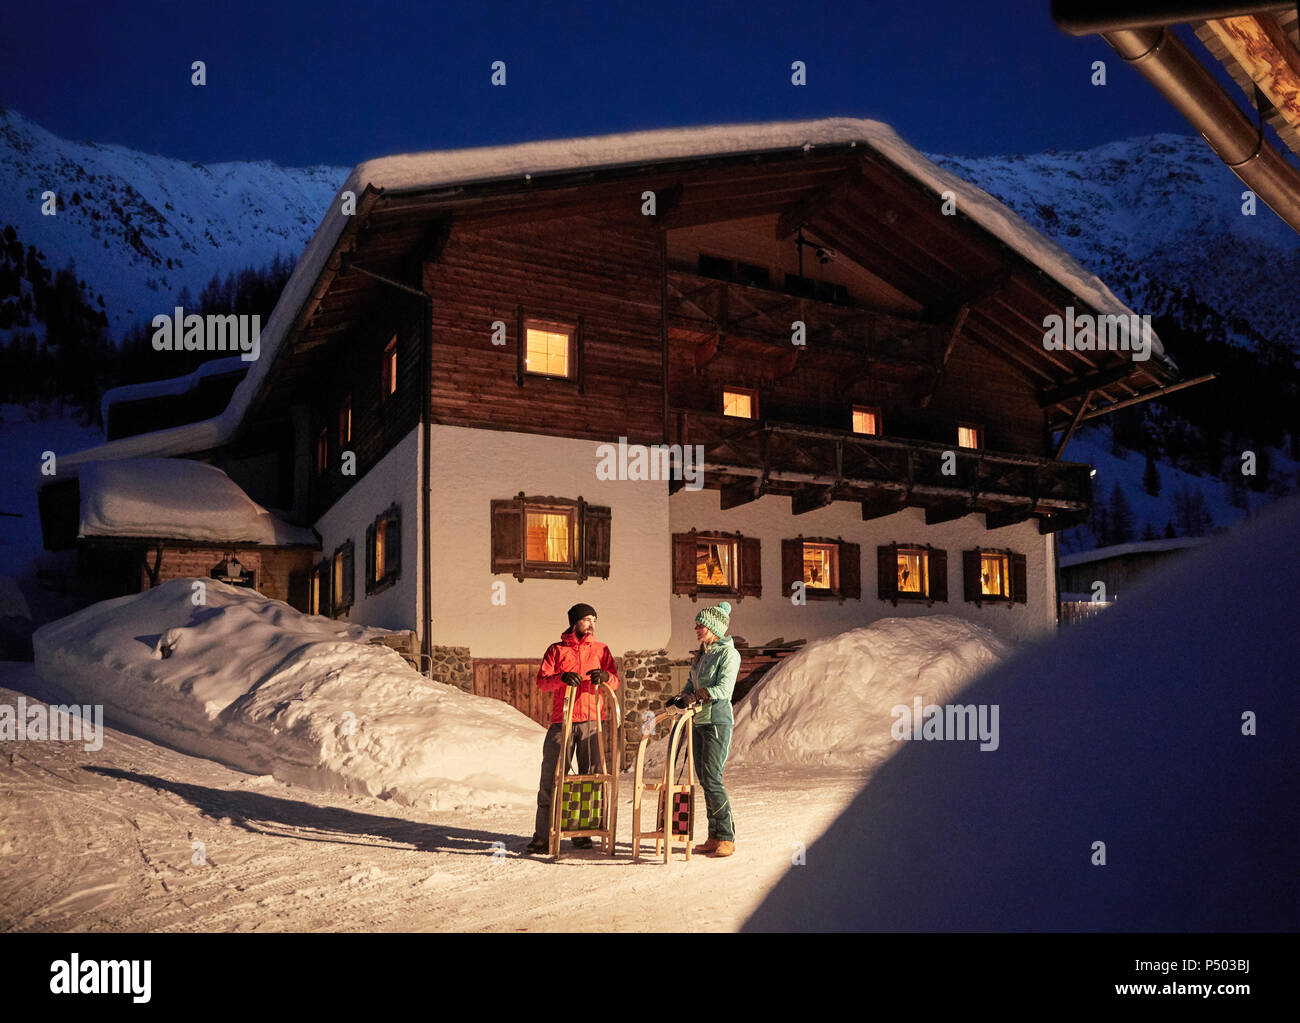 Couple with sledges in snow-covered landscape with rustic house at night Stock Photo